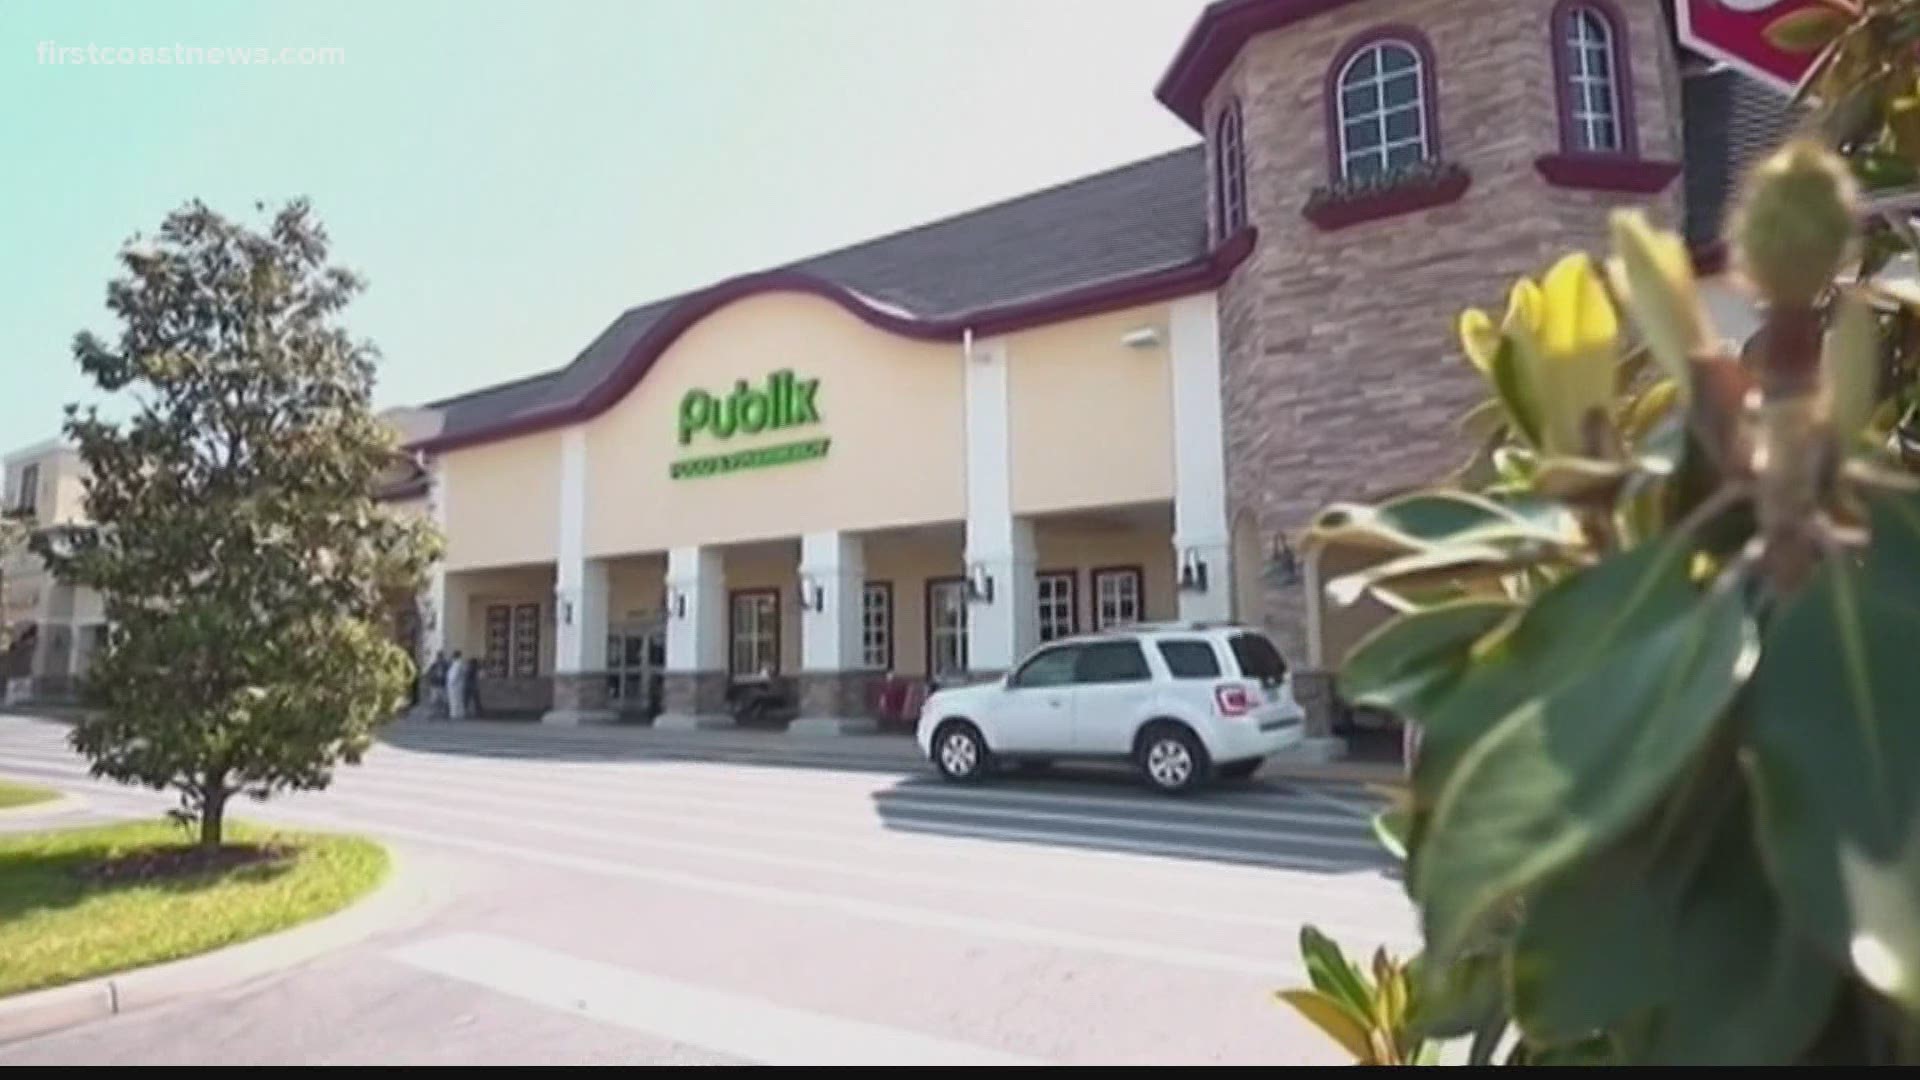 Starting July 21, Publix shoppers will be required to wear a face-covering at all stores in order to limit the spread of COVID-19.